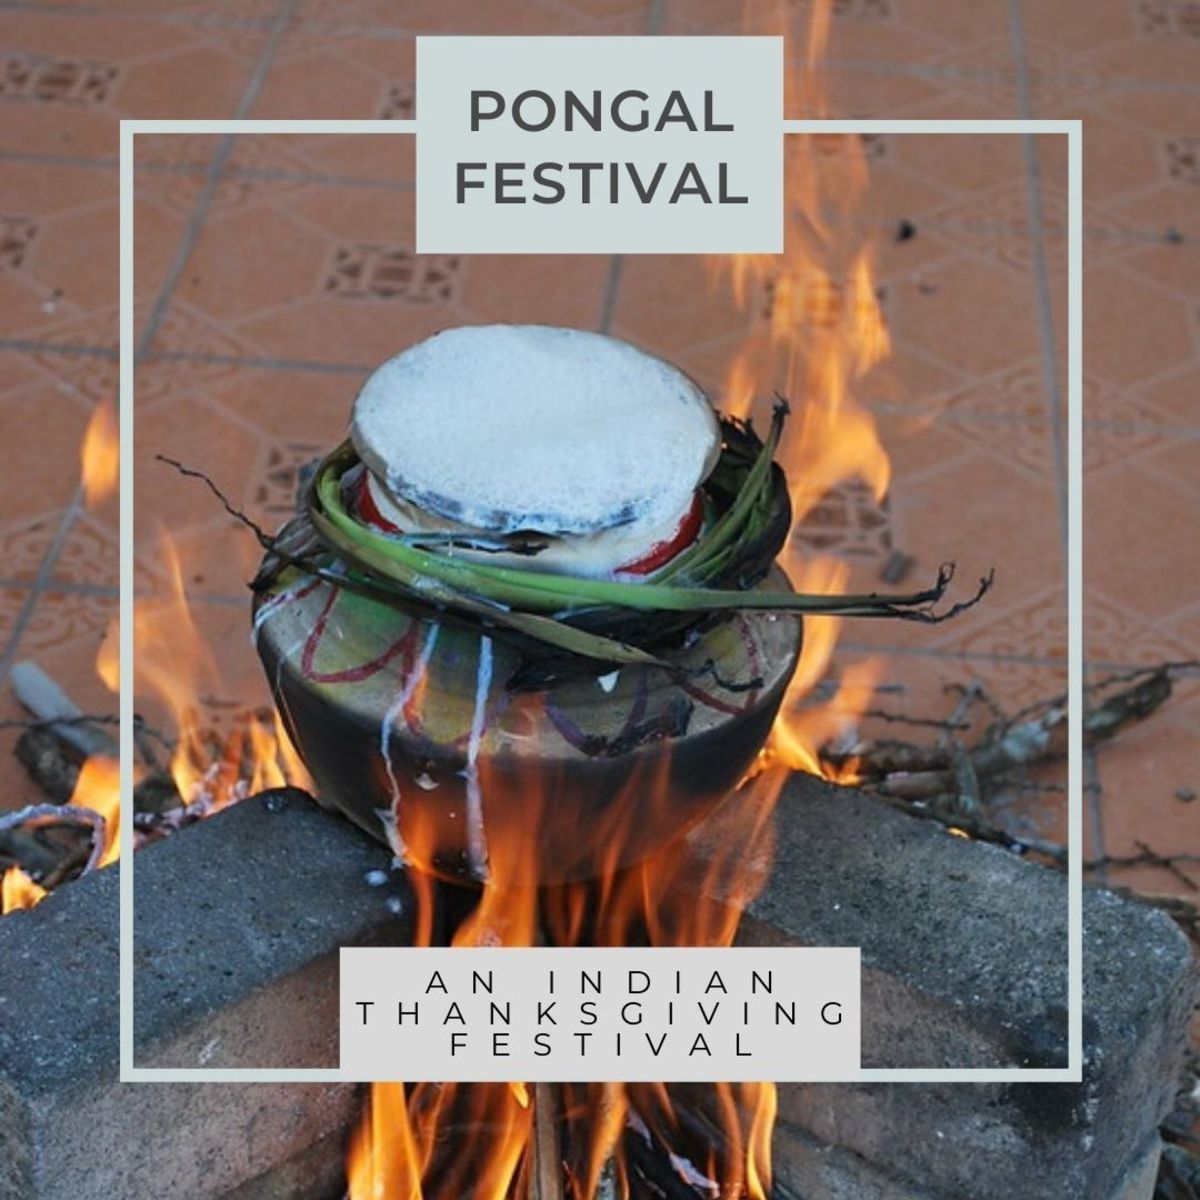 Pongal Festival in Malaysia - an Indian Thanksgiving Festival